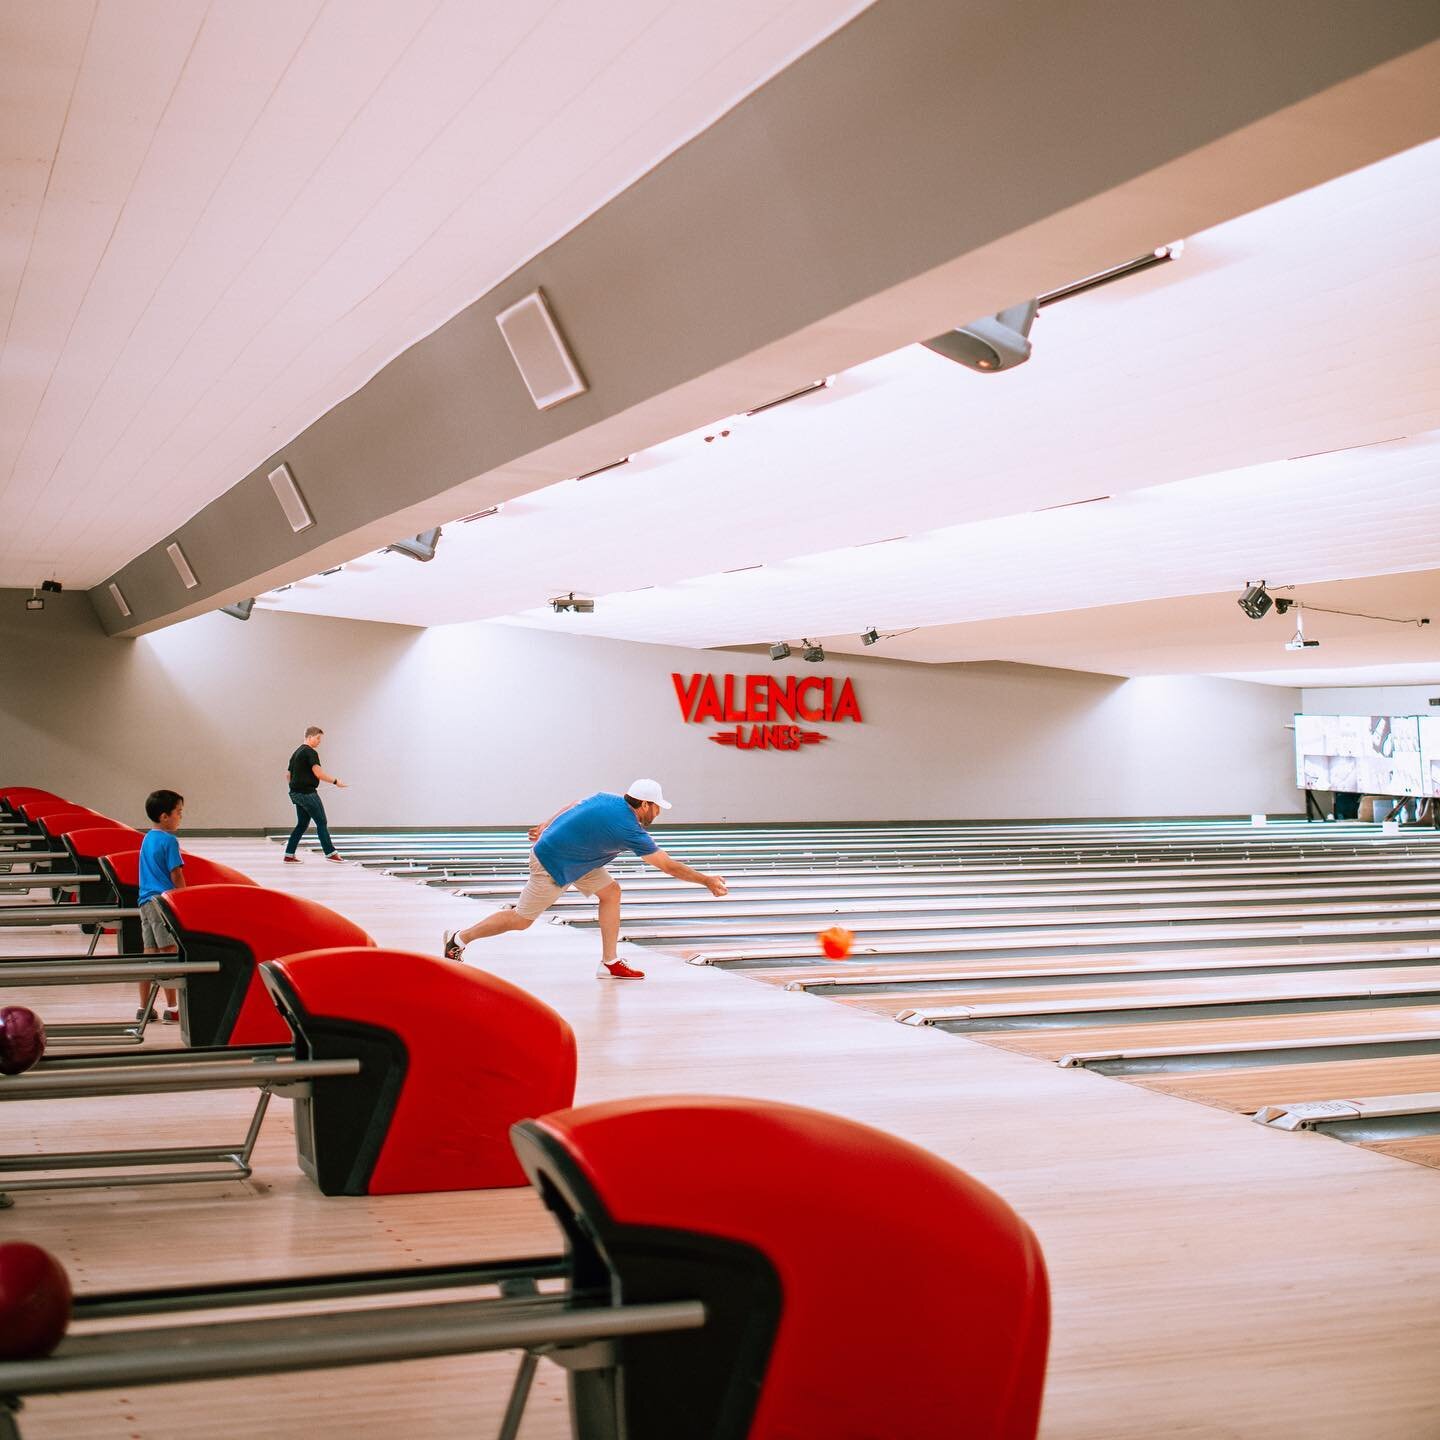 The lanes are calling and I must go 👋🎳Open today from 11am-7pm. #ValenciaLanes